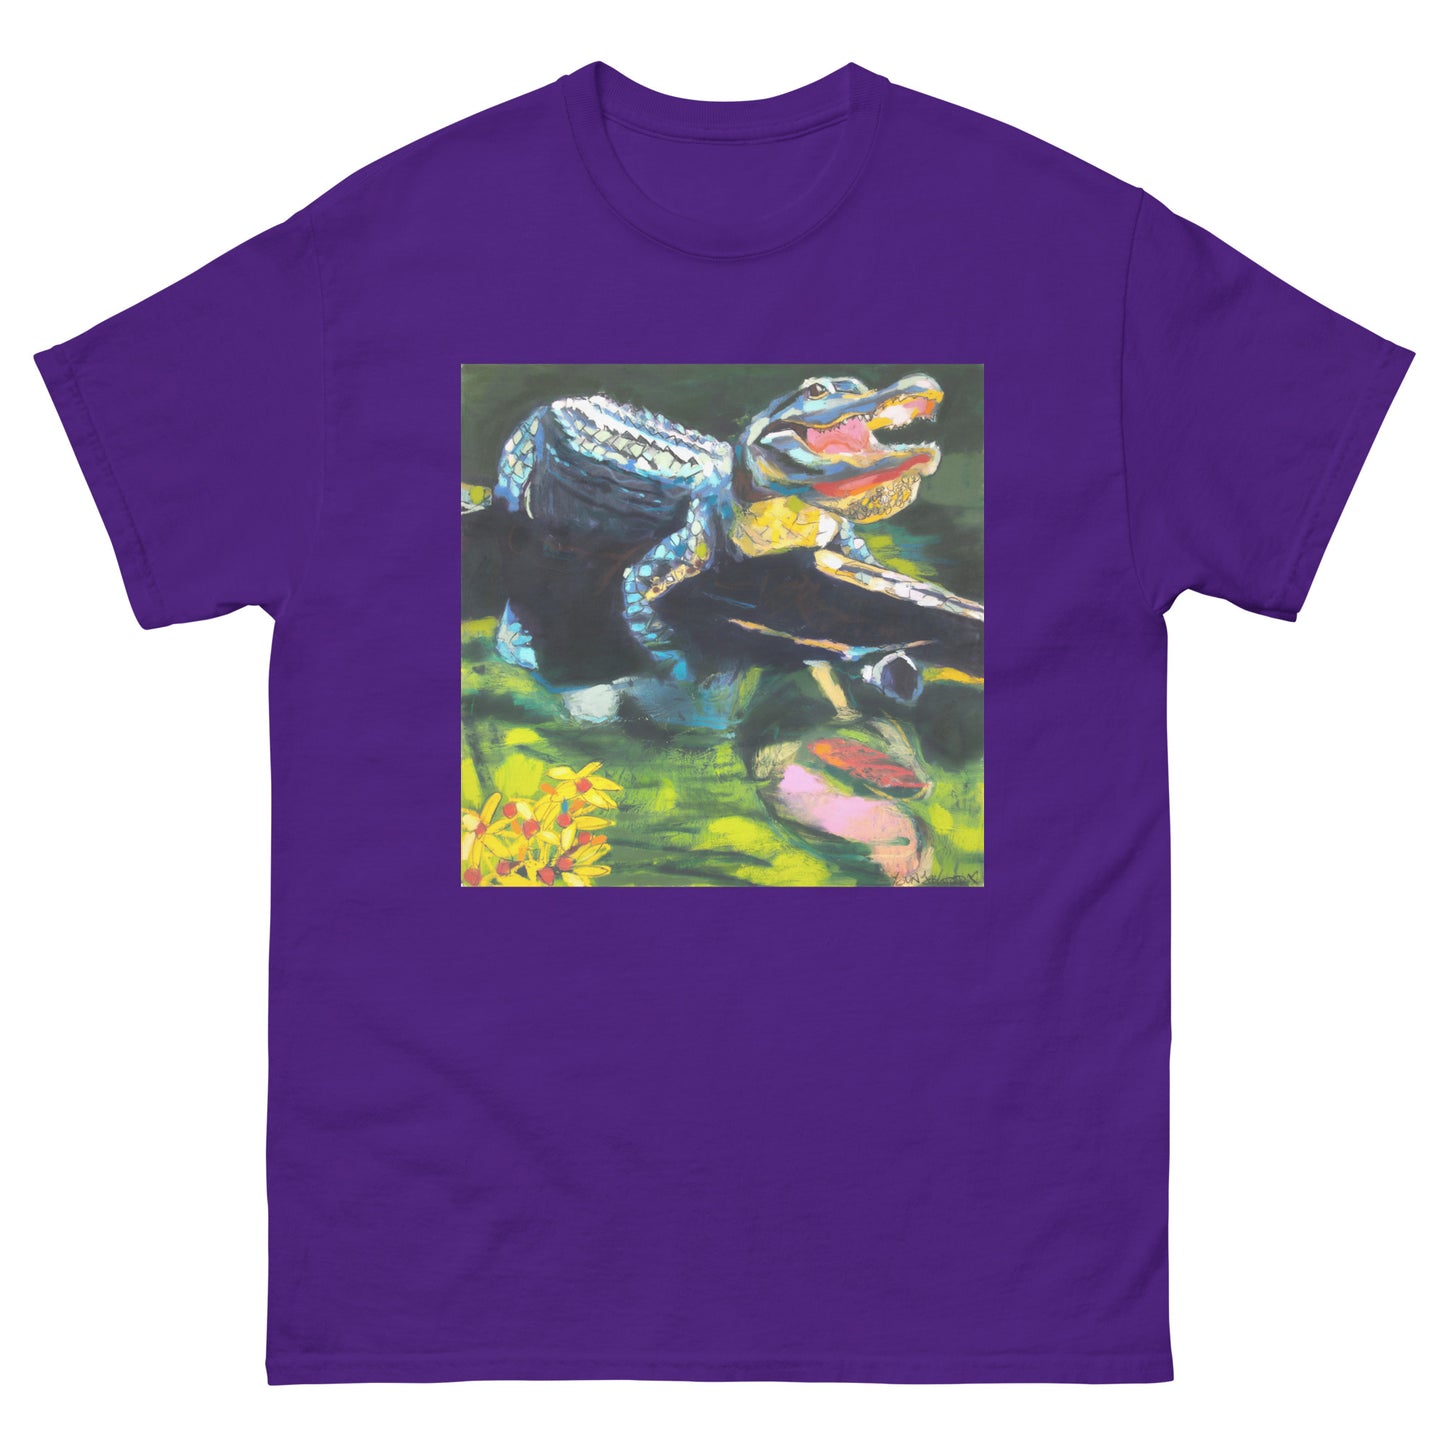 Square Gator with Wildflowers Unisex classic tee